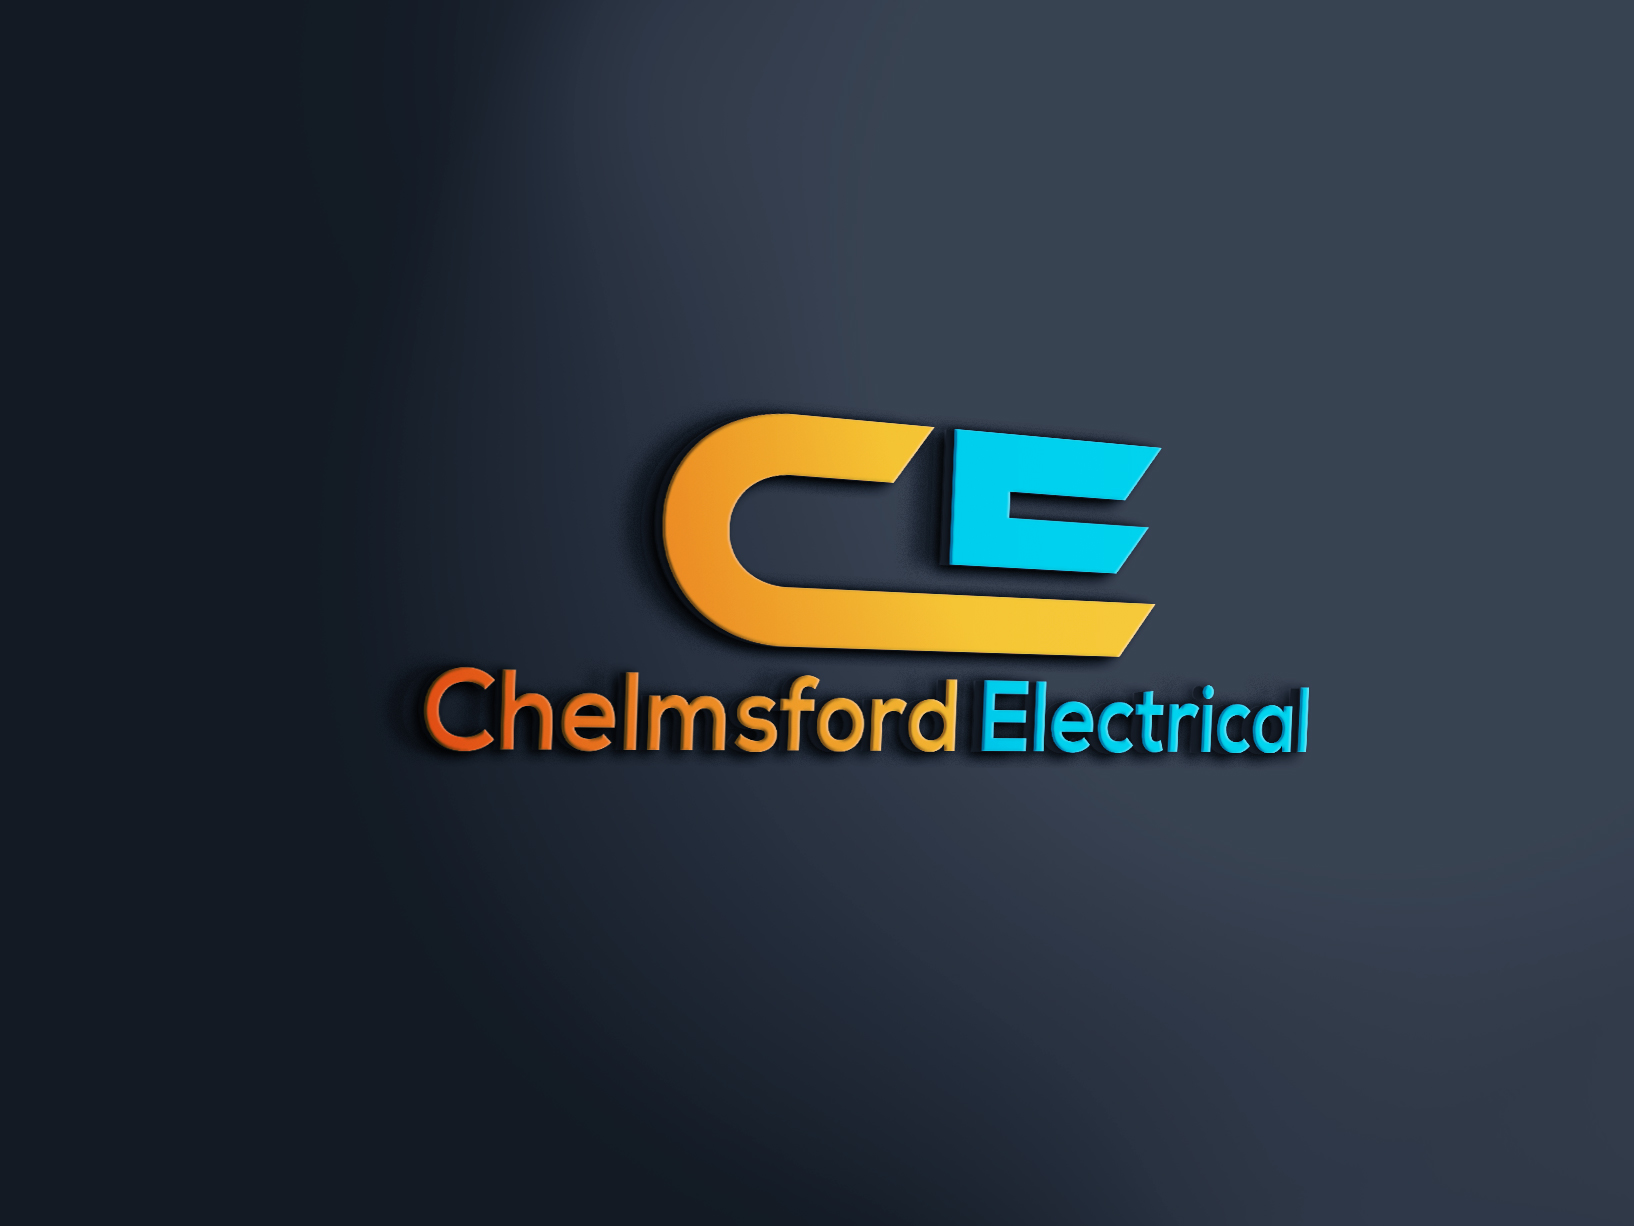 Chelmsford Electrical